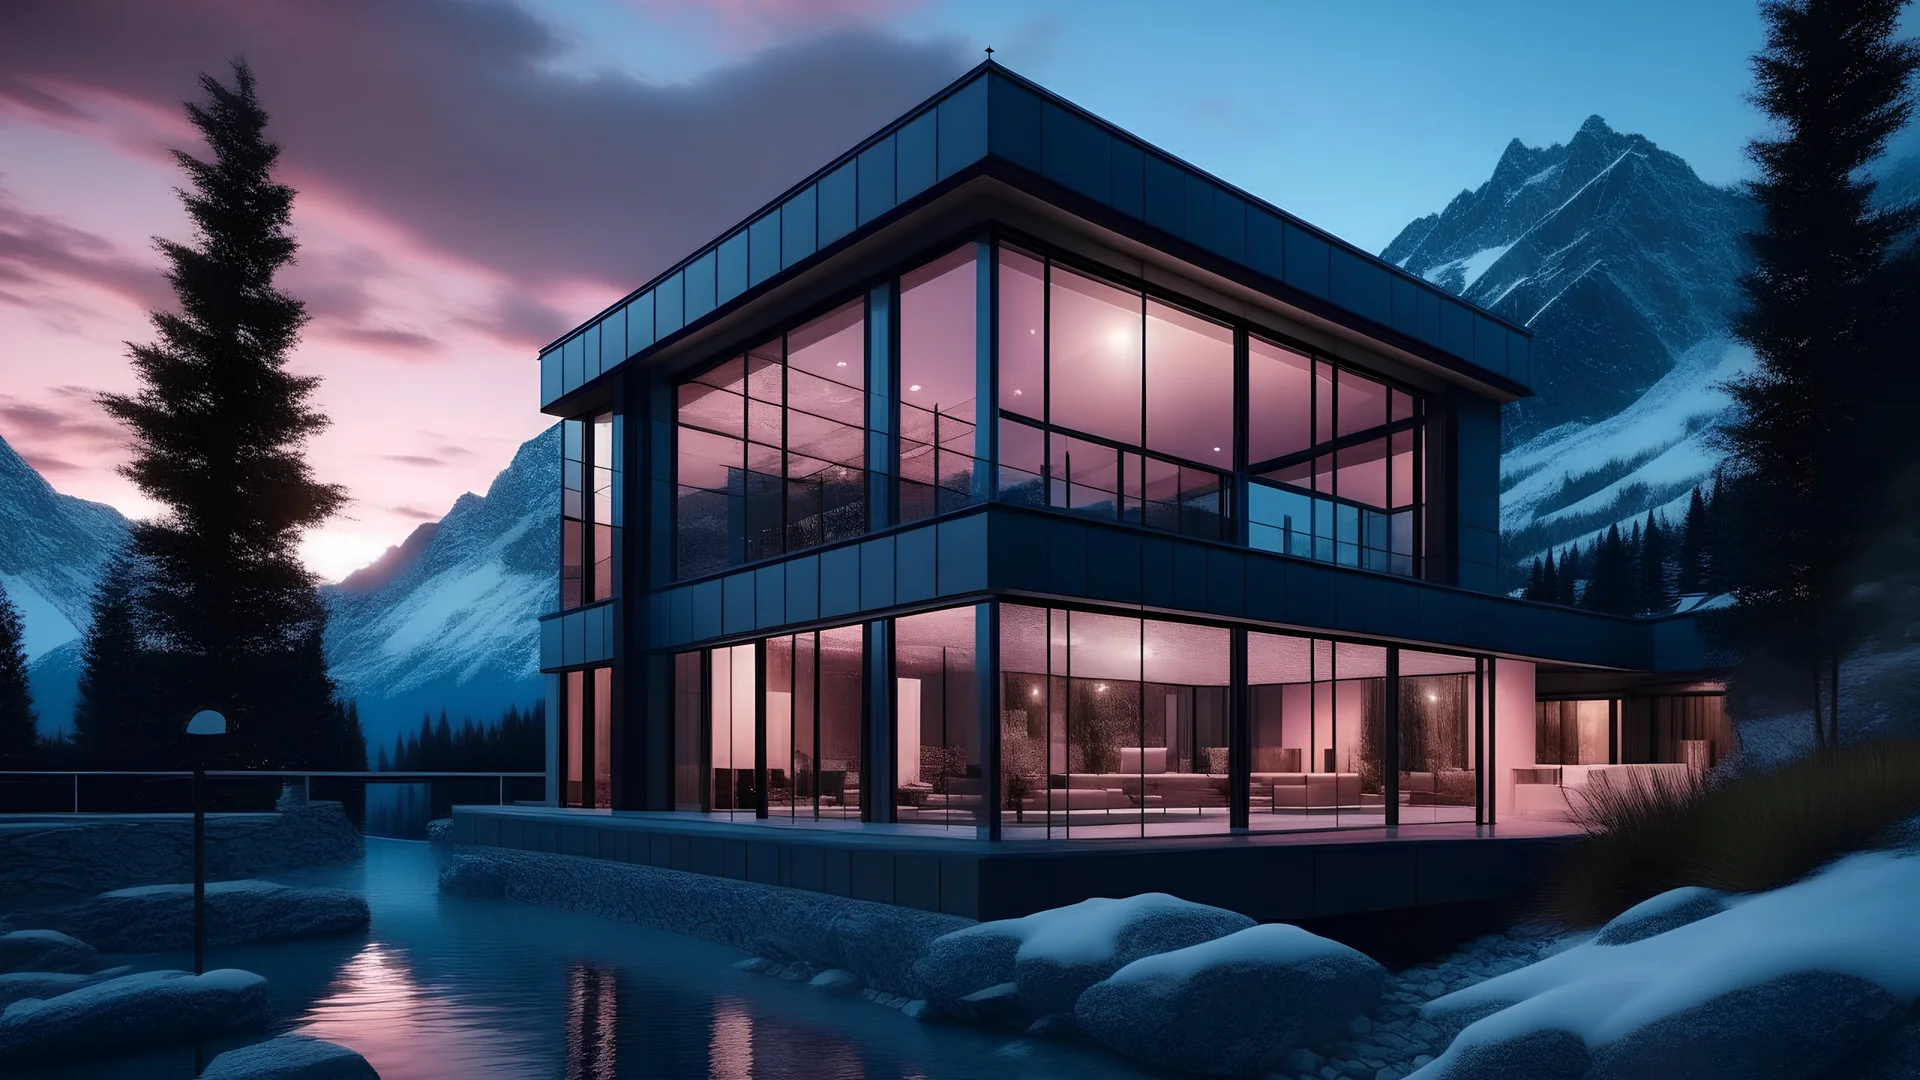 Lake house, pink facade, stone facade, black glass frame, views of the snowy mountain hills of Aspen, blue hour, realistic vray, 8k, modern architecture 8k 8k]